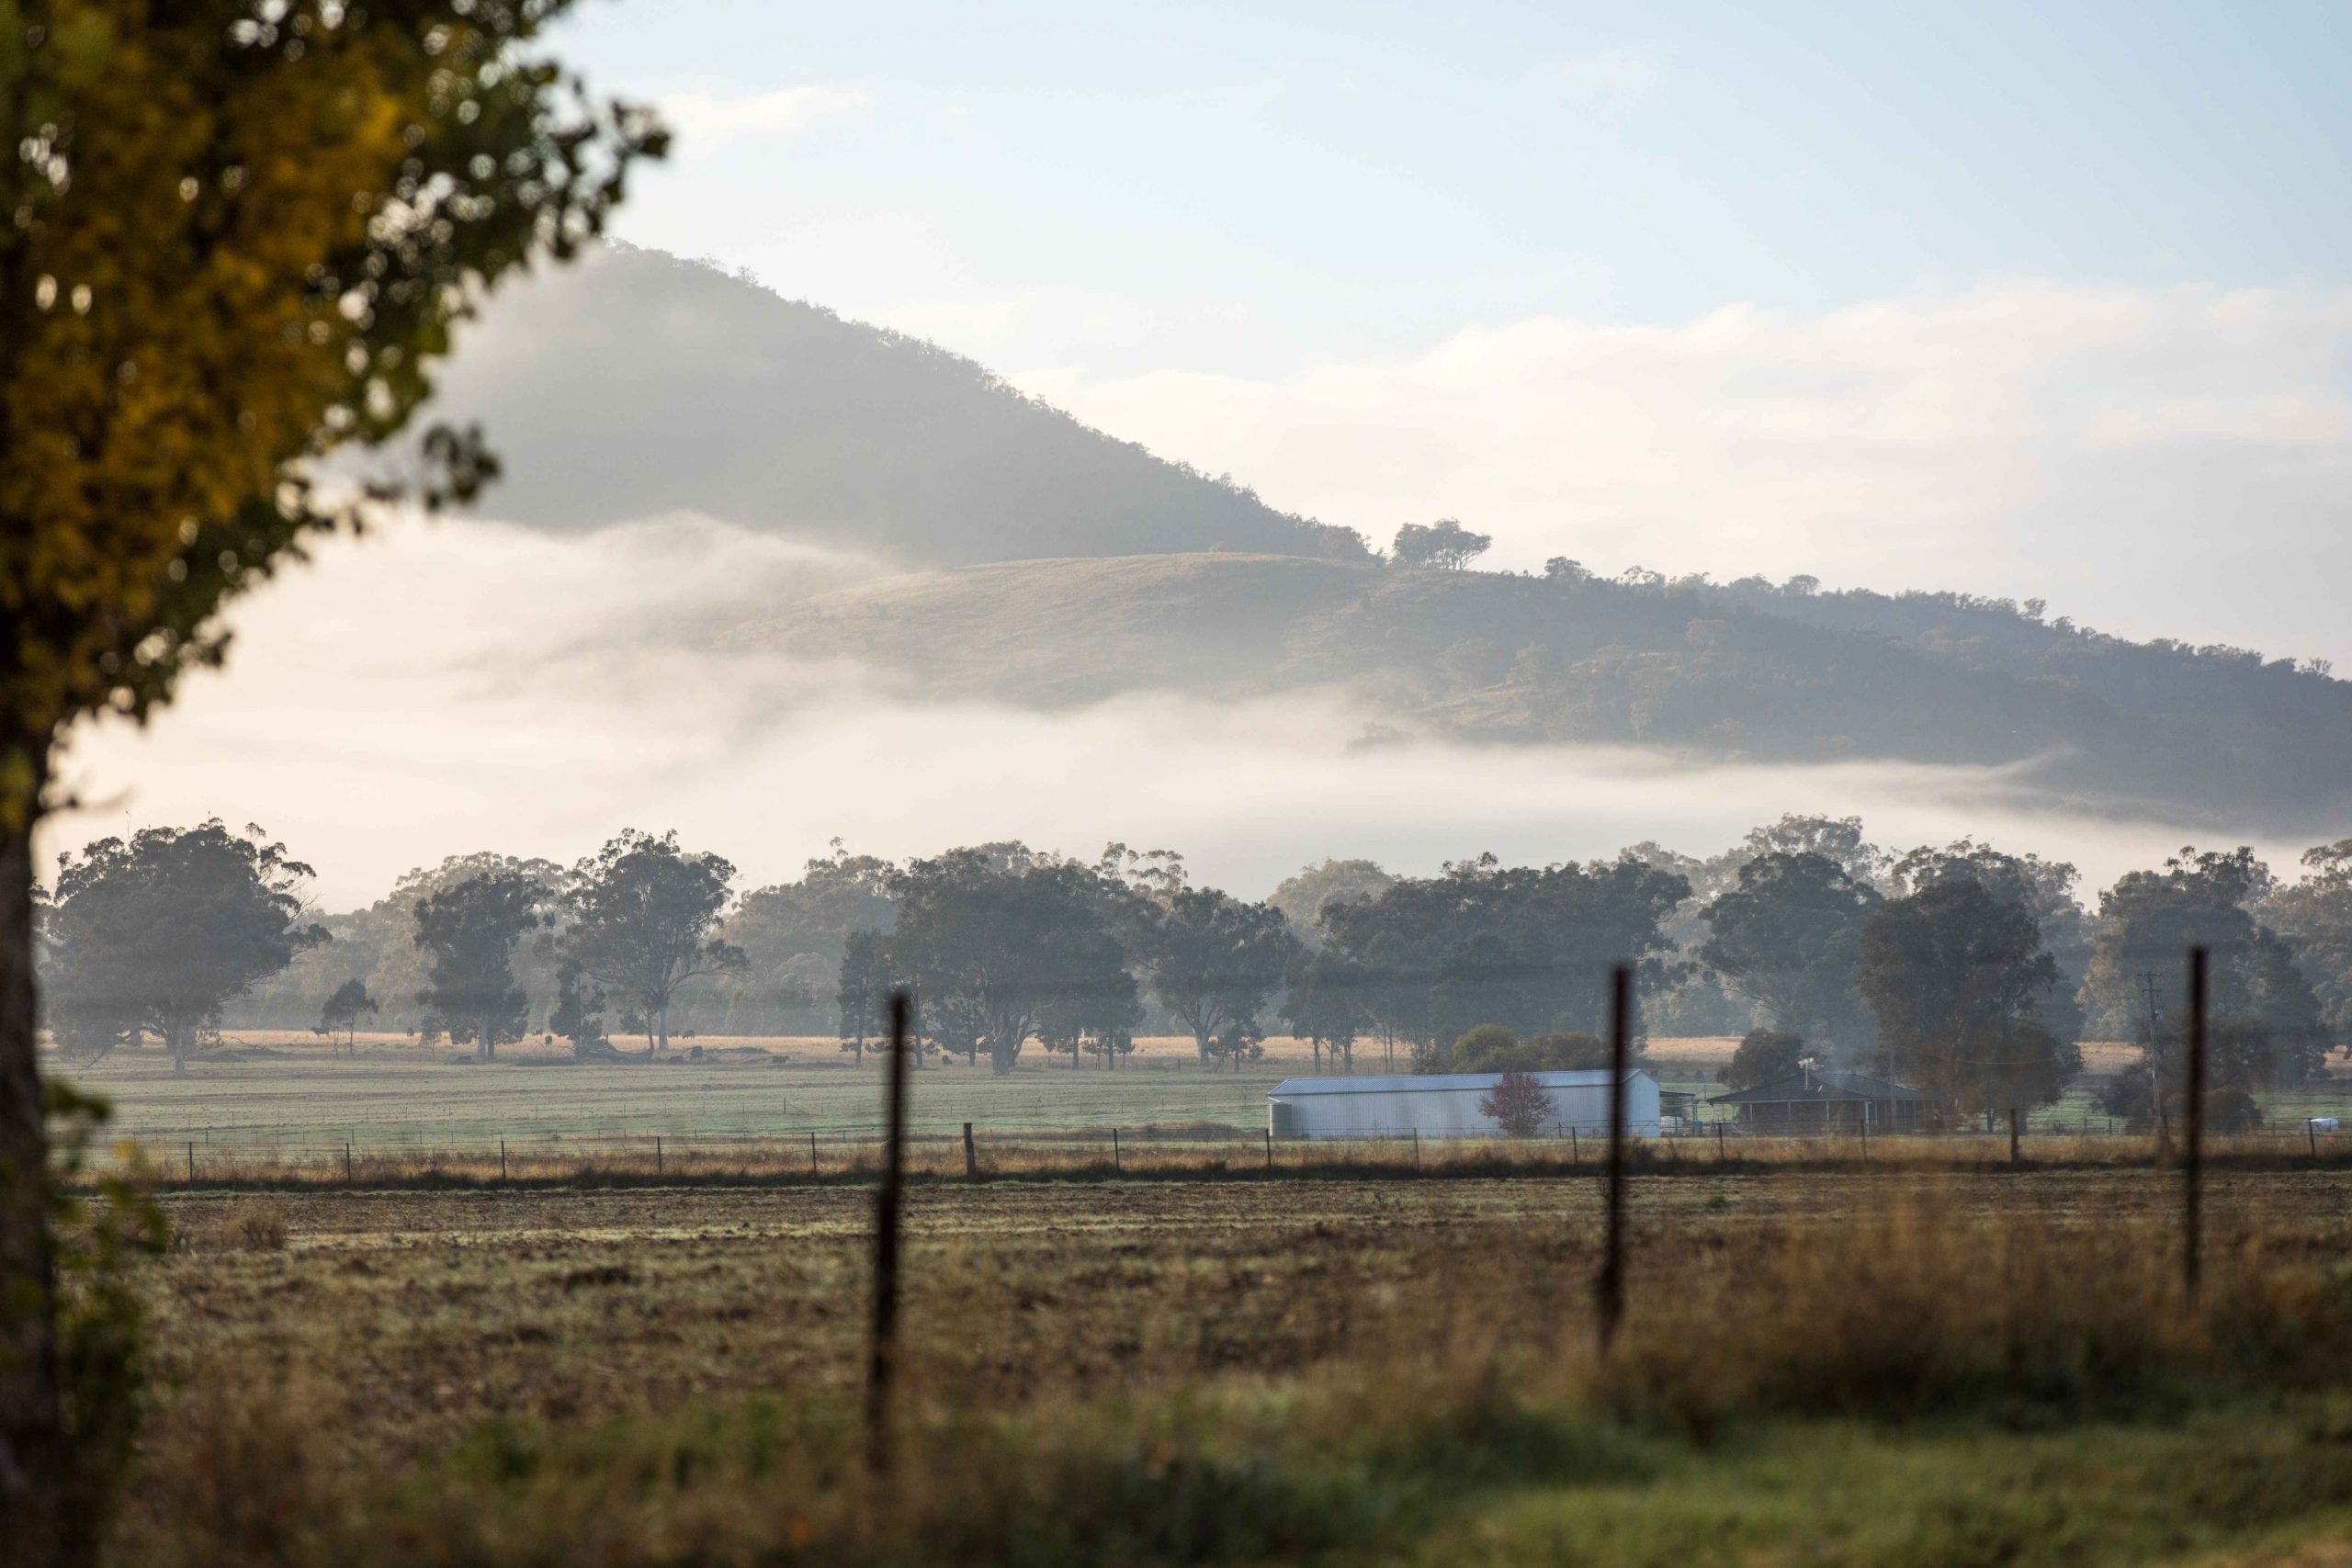 Australian rural scene with mountain and mist in the background, rural fence in foreground